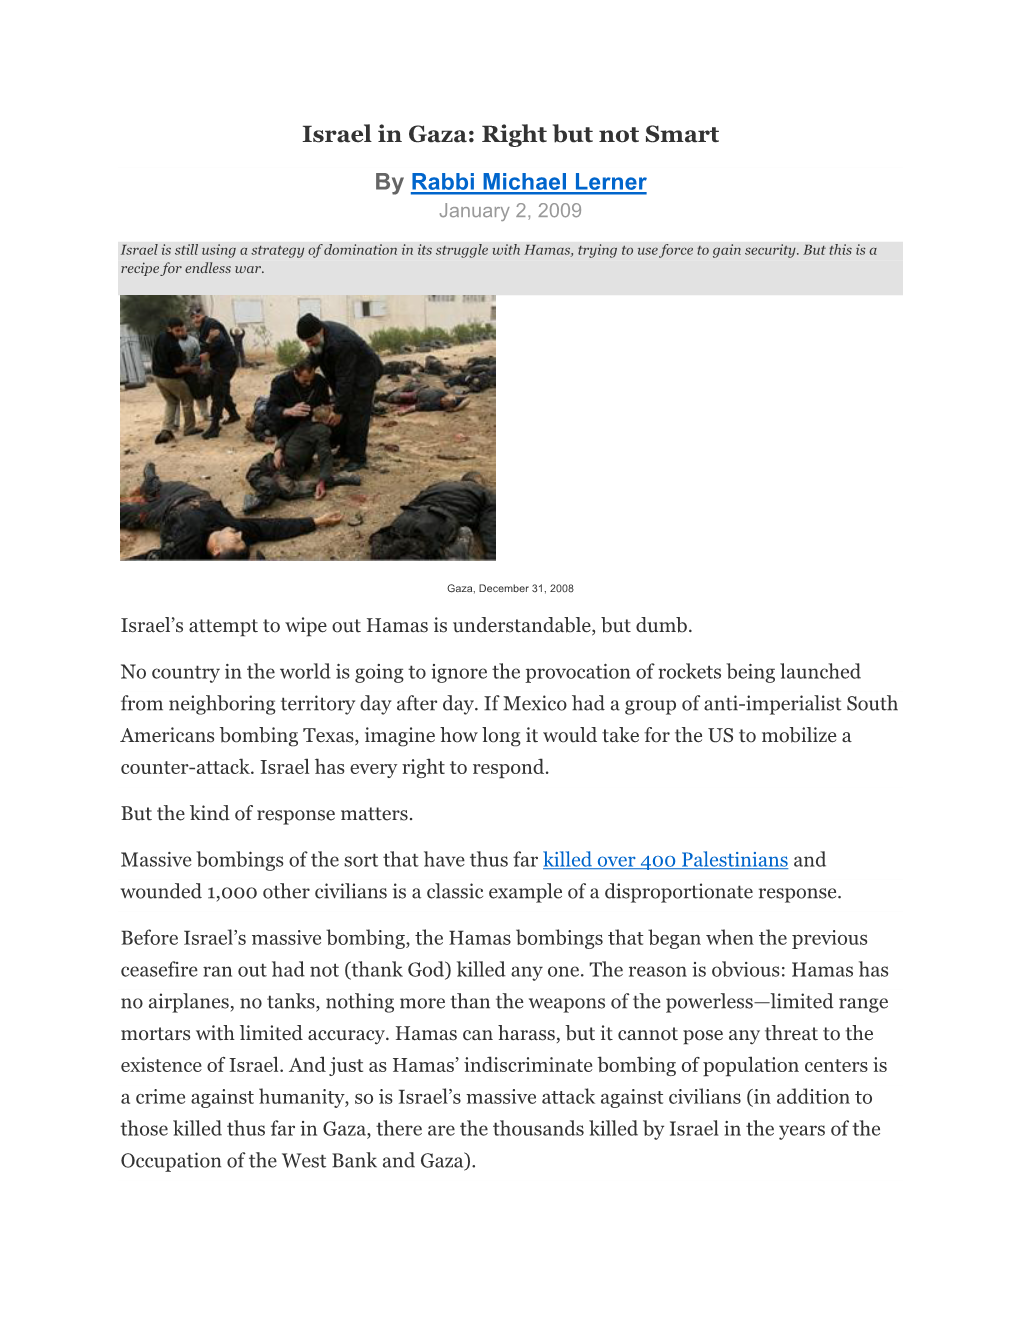 Israel in Gaza: Right but Not Smart by Rabbi Michael Lerner